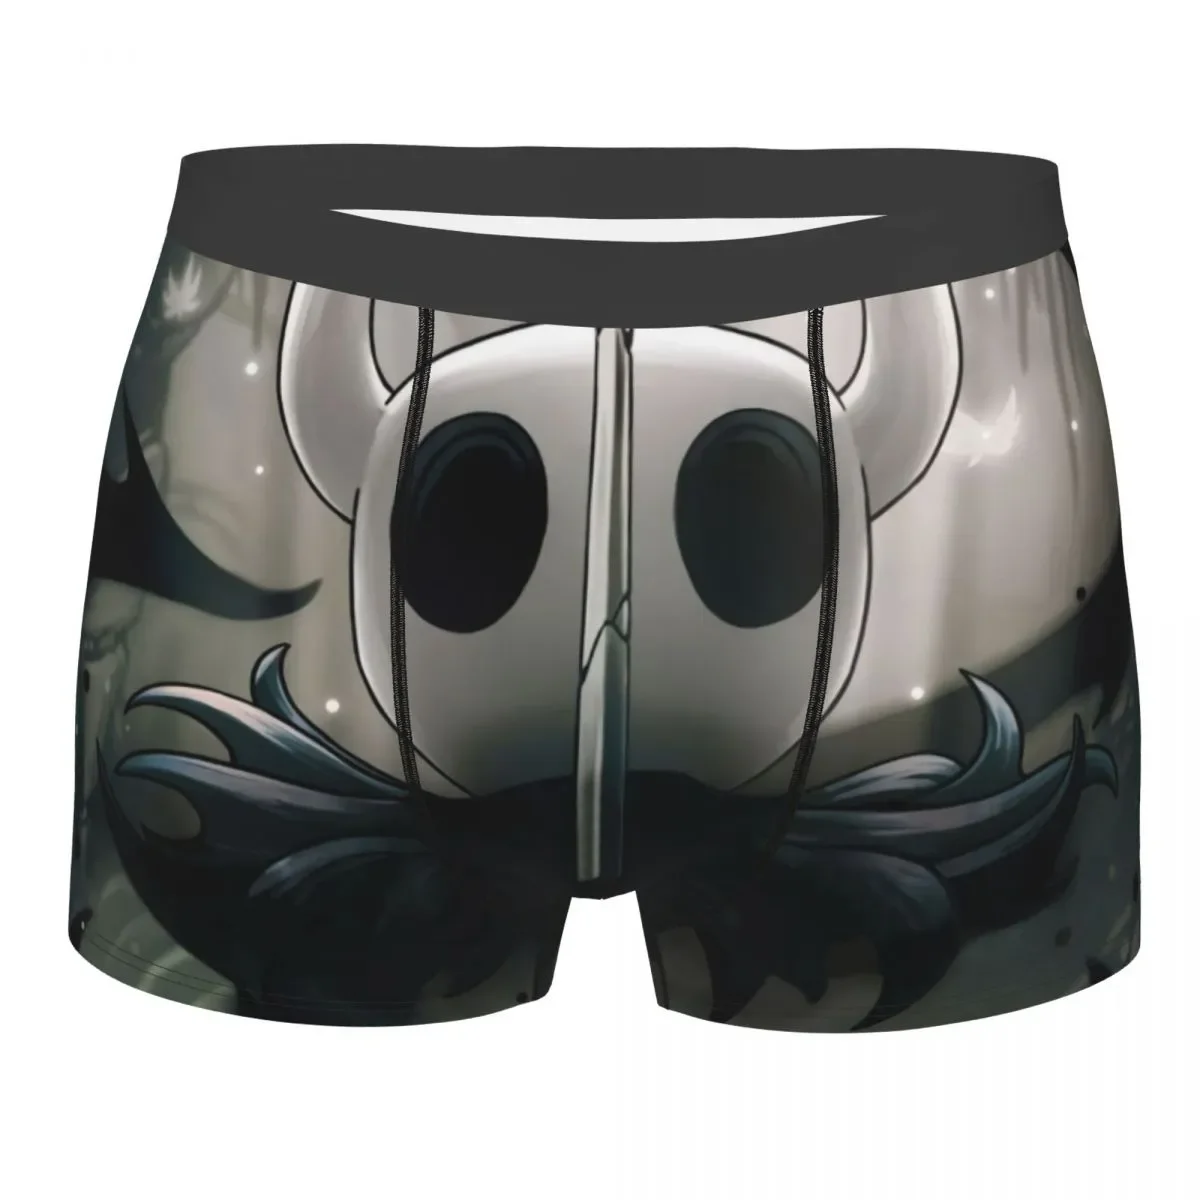 

Sword Men Boxer Briefs Underpants Hollow Knight Game Highly Breathable Top Quality Sexy Shorts Gift Idea